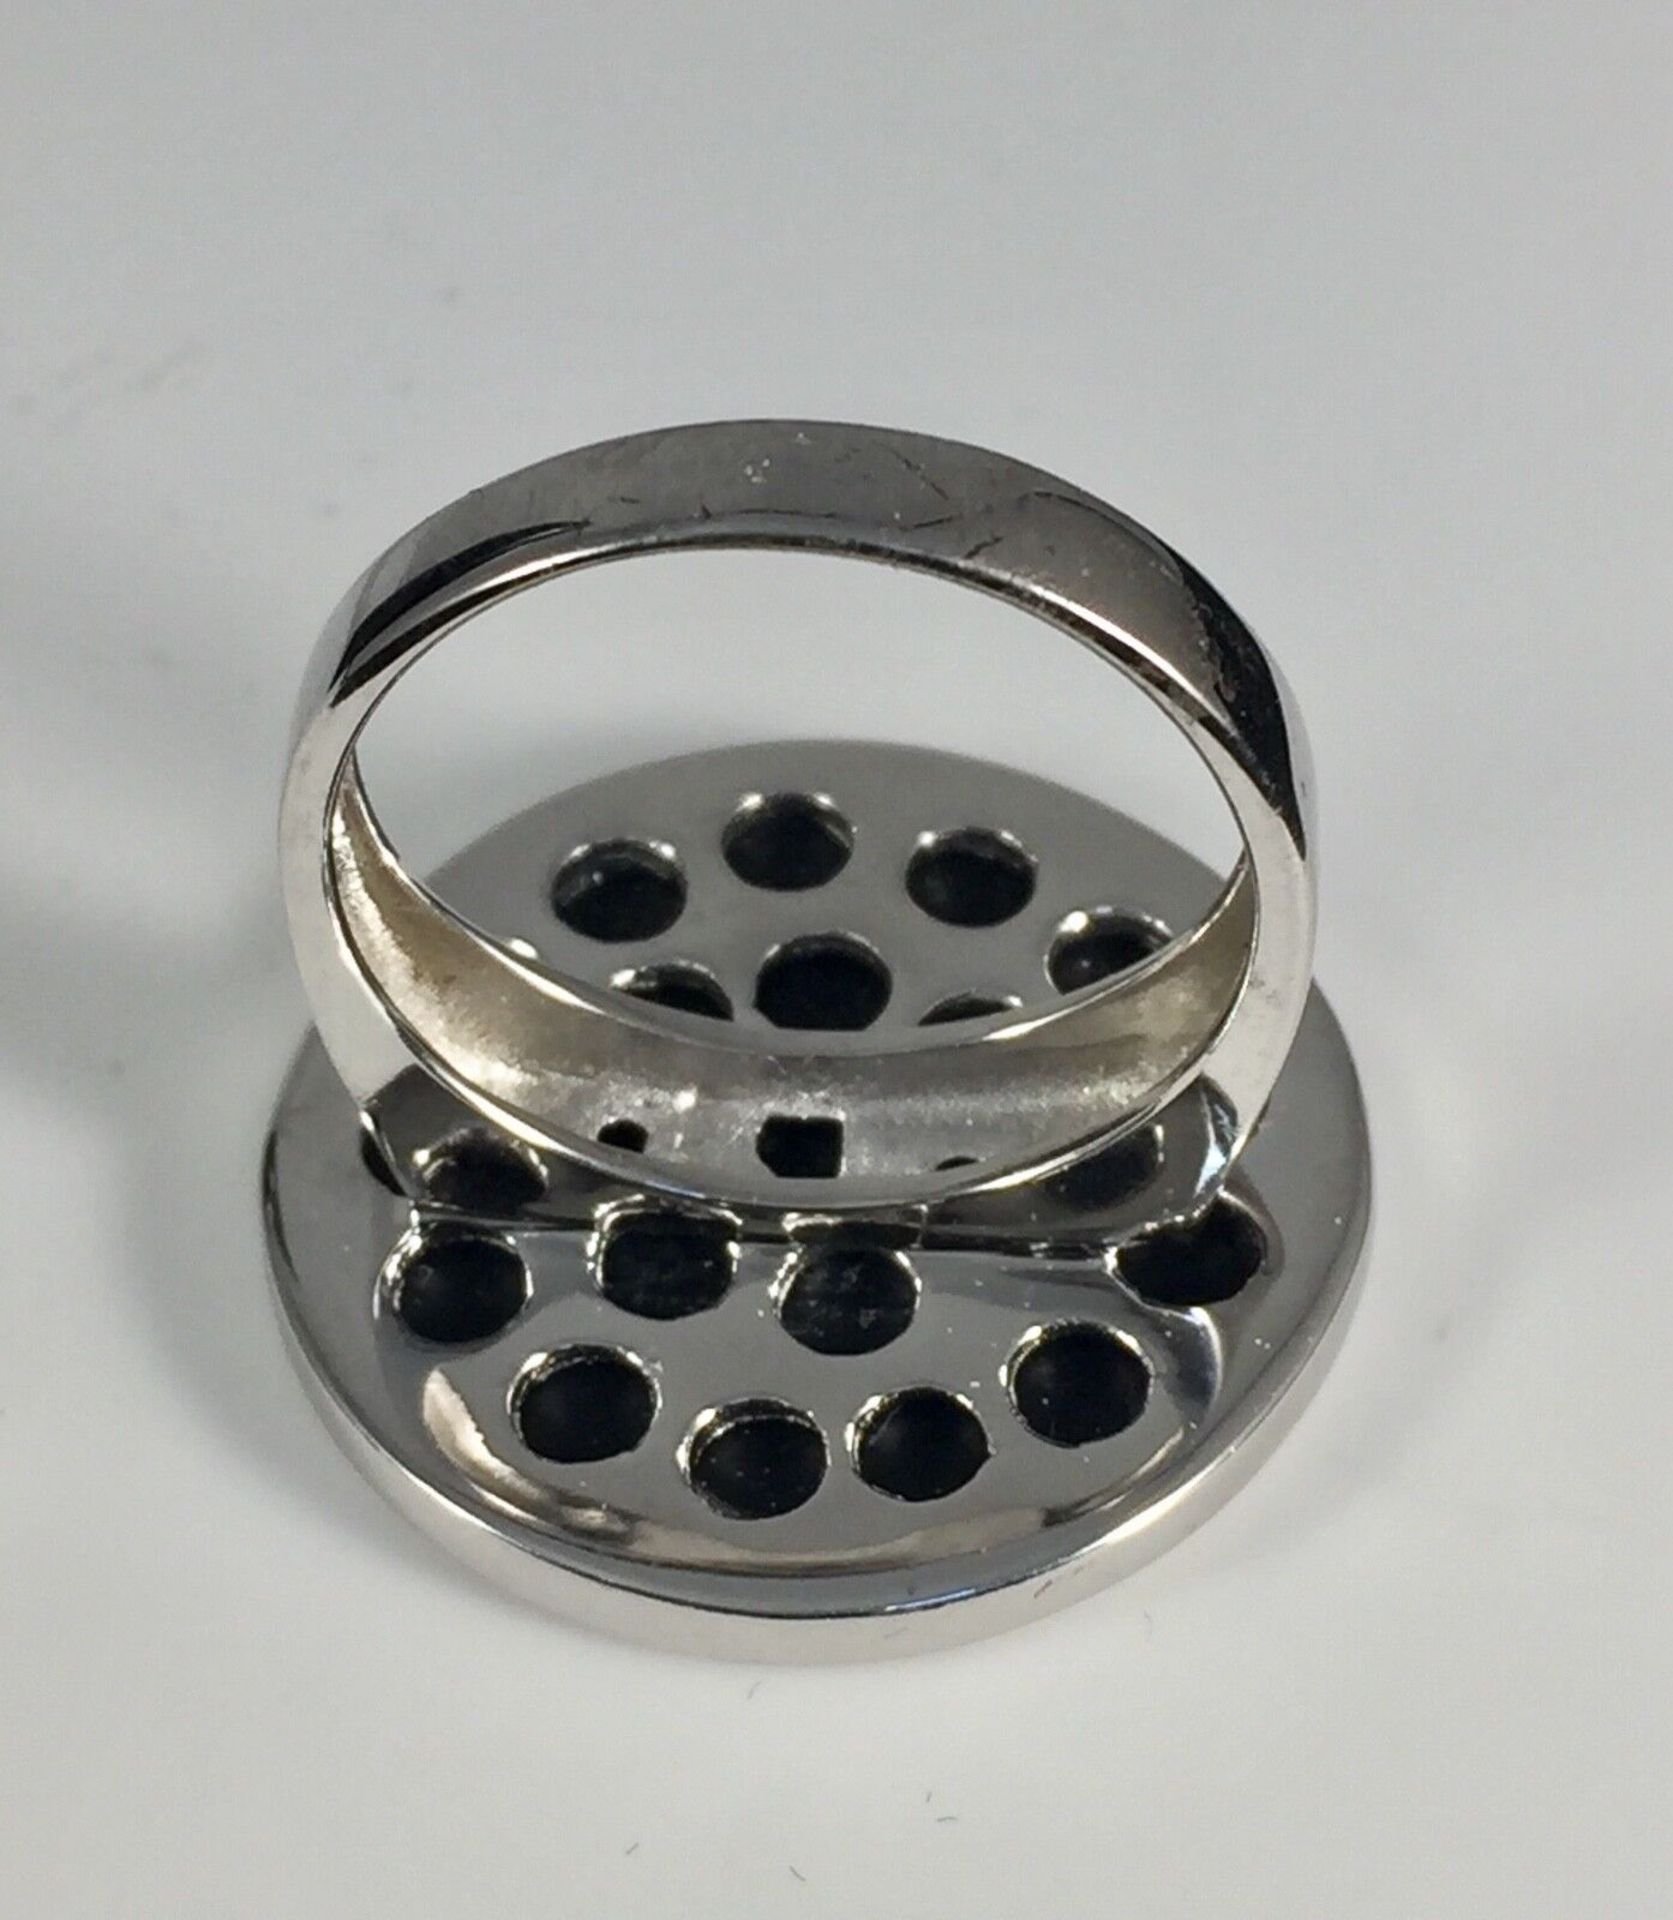 BLACK DISC FASHION RING IN STERLING SILVER - Image 5 of 5